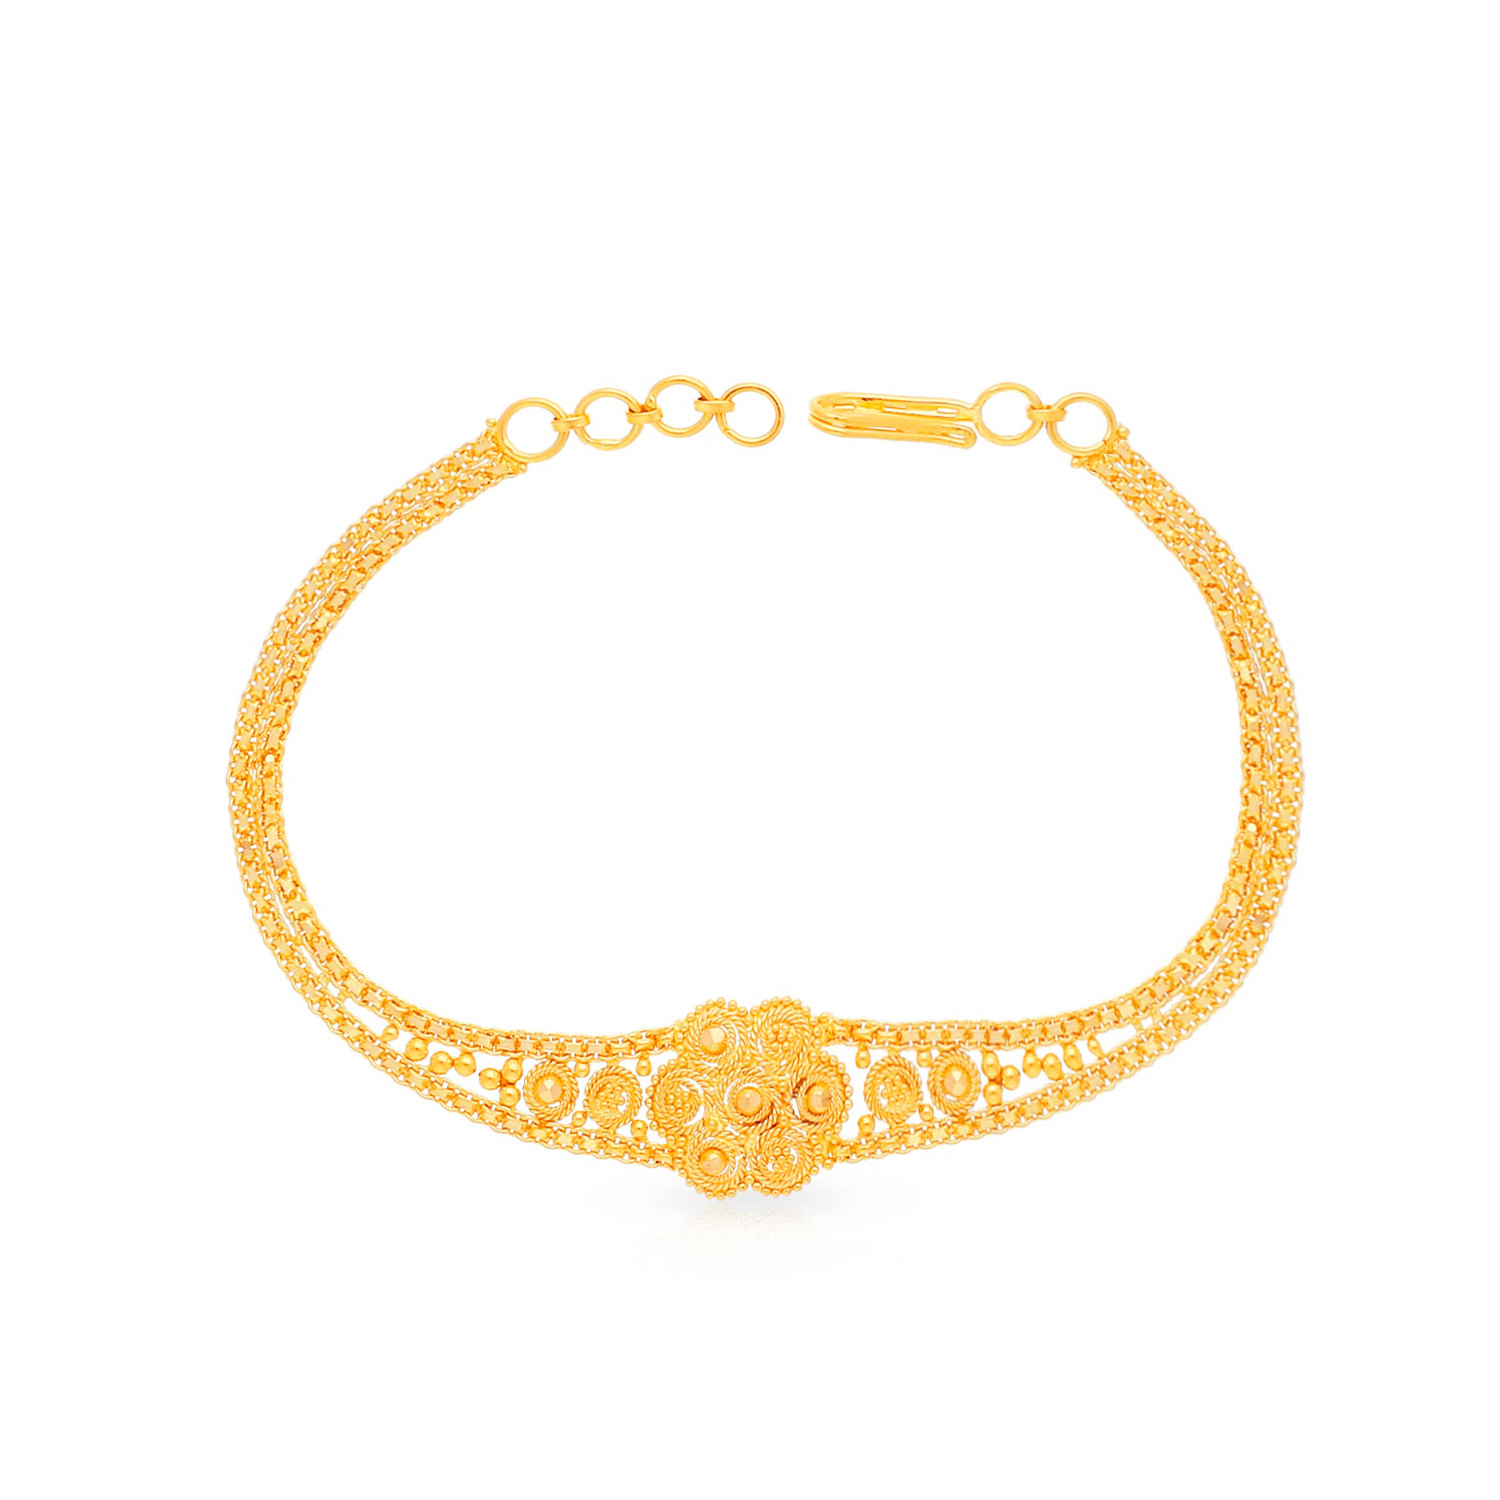 Roberto Coin Bracelet Paperclip Chain in 18k Yellow Gold